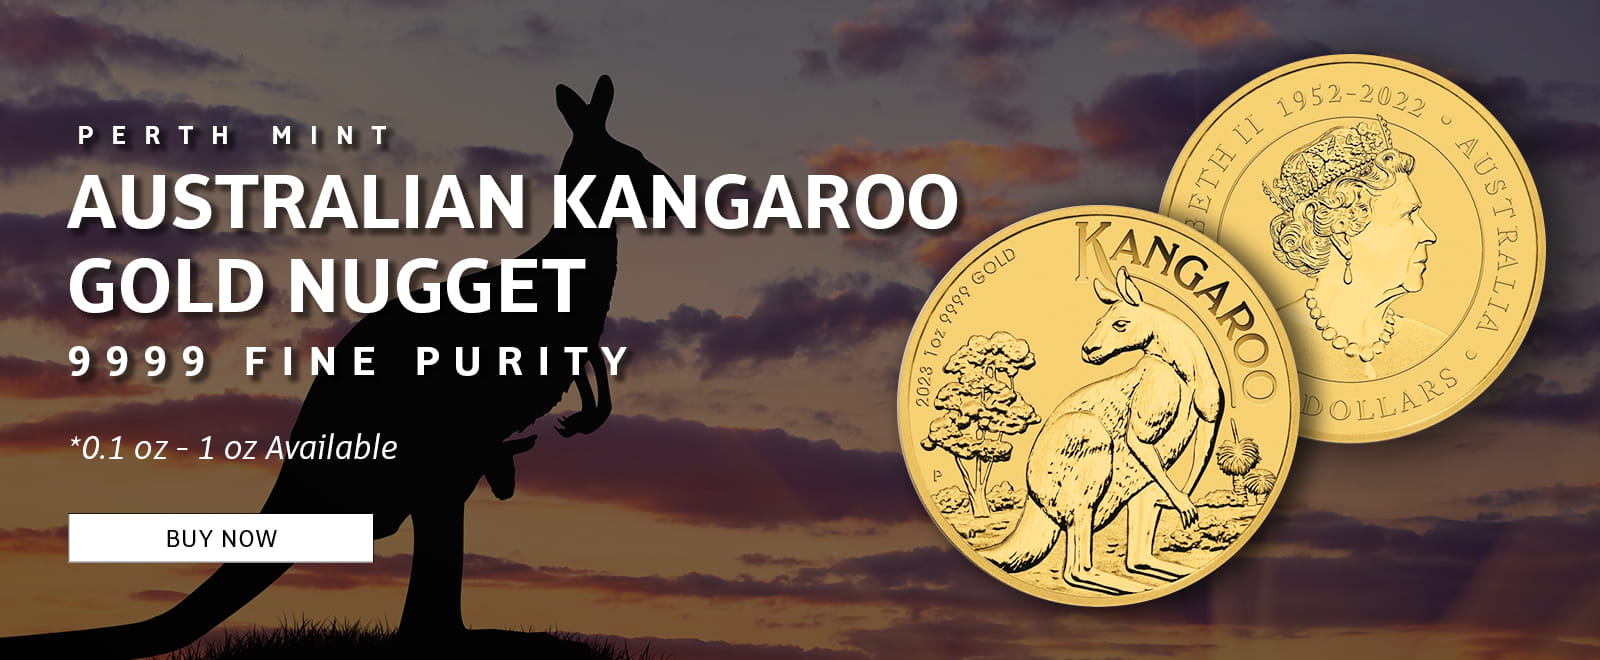 Perth Mint Australian Kangaroo Gold Nuggets, available in various weights from 1/10 oz to 1 oz